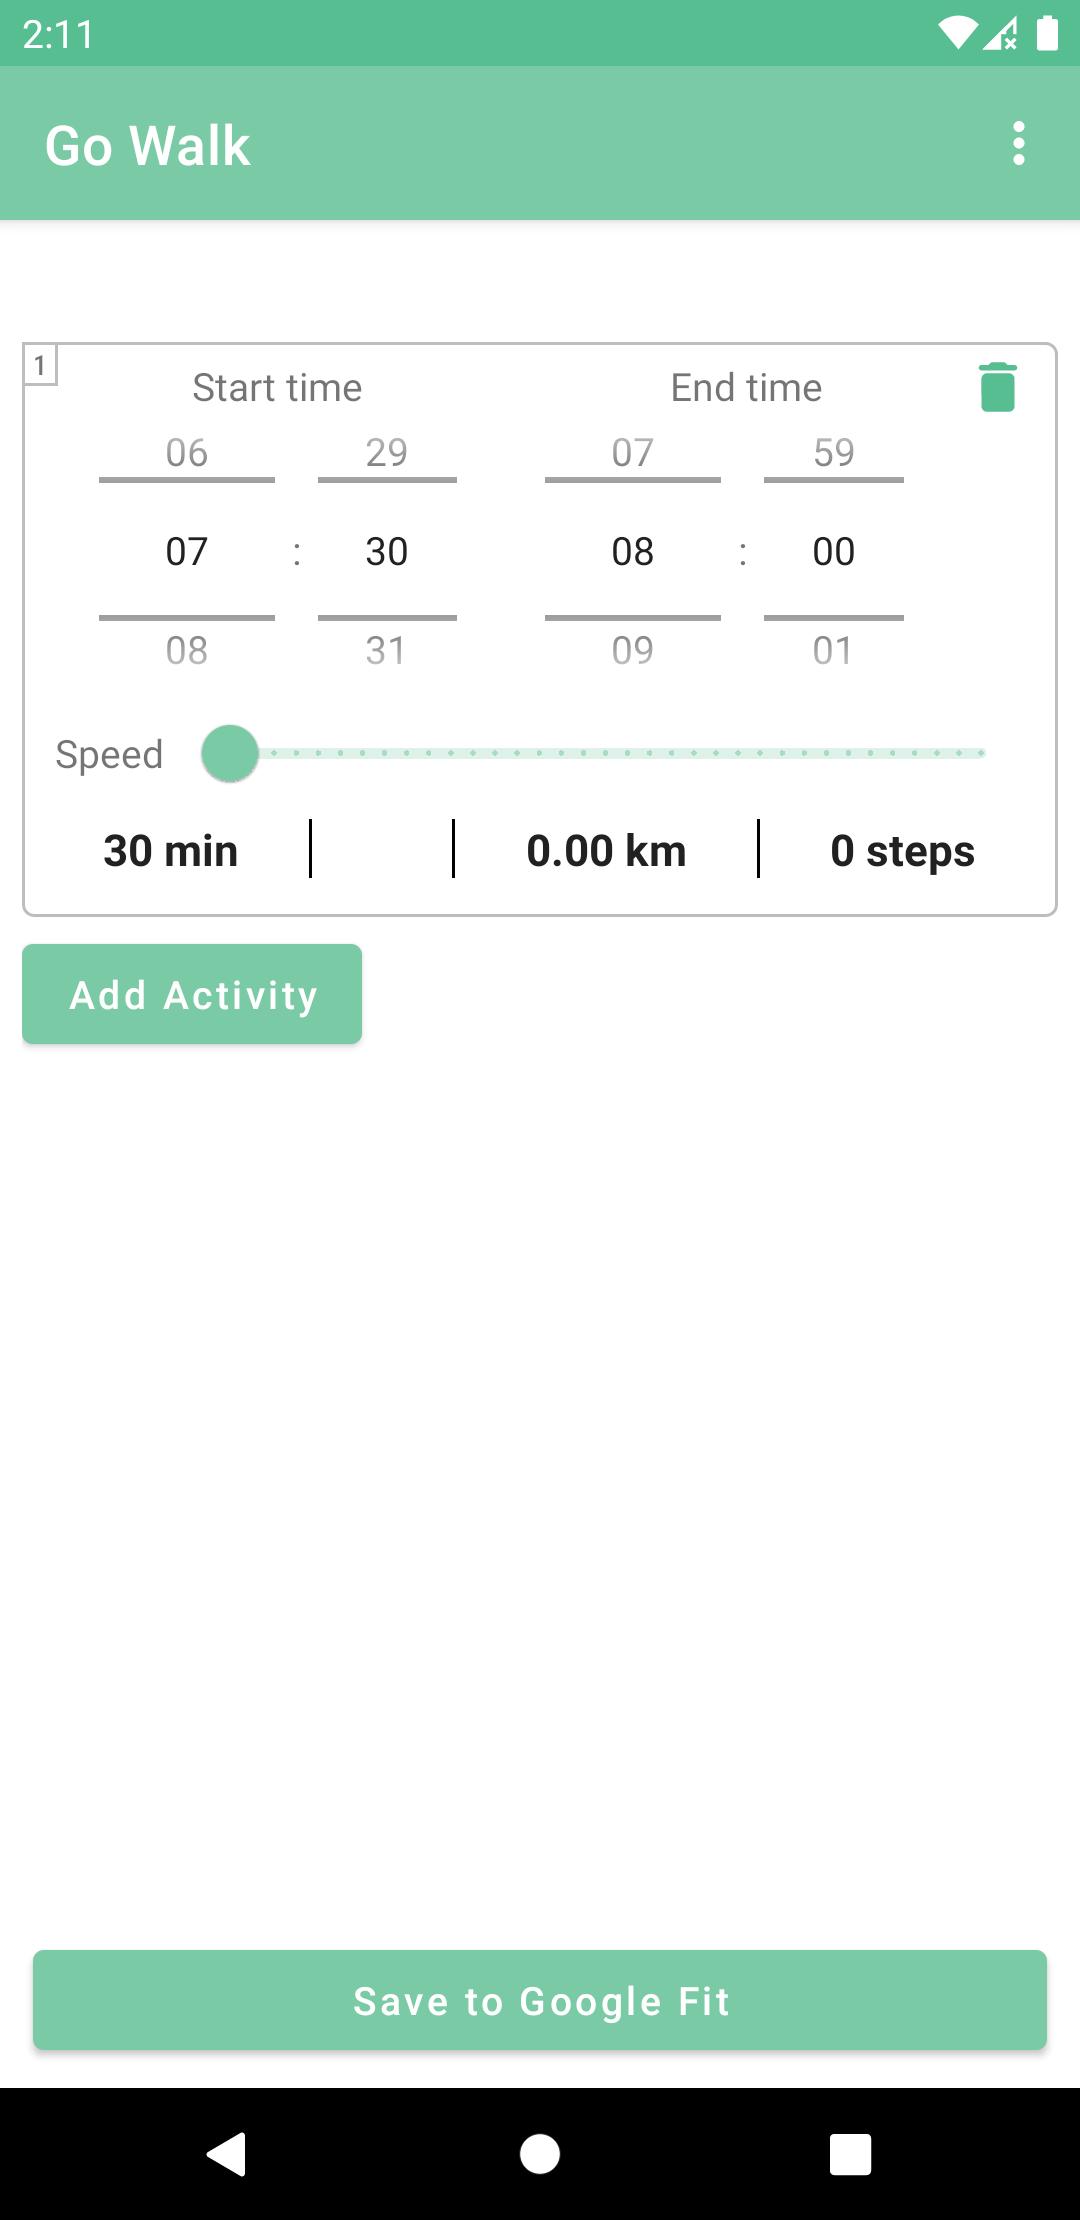 Go Walk for Android - APK Download